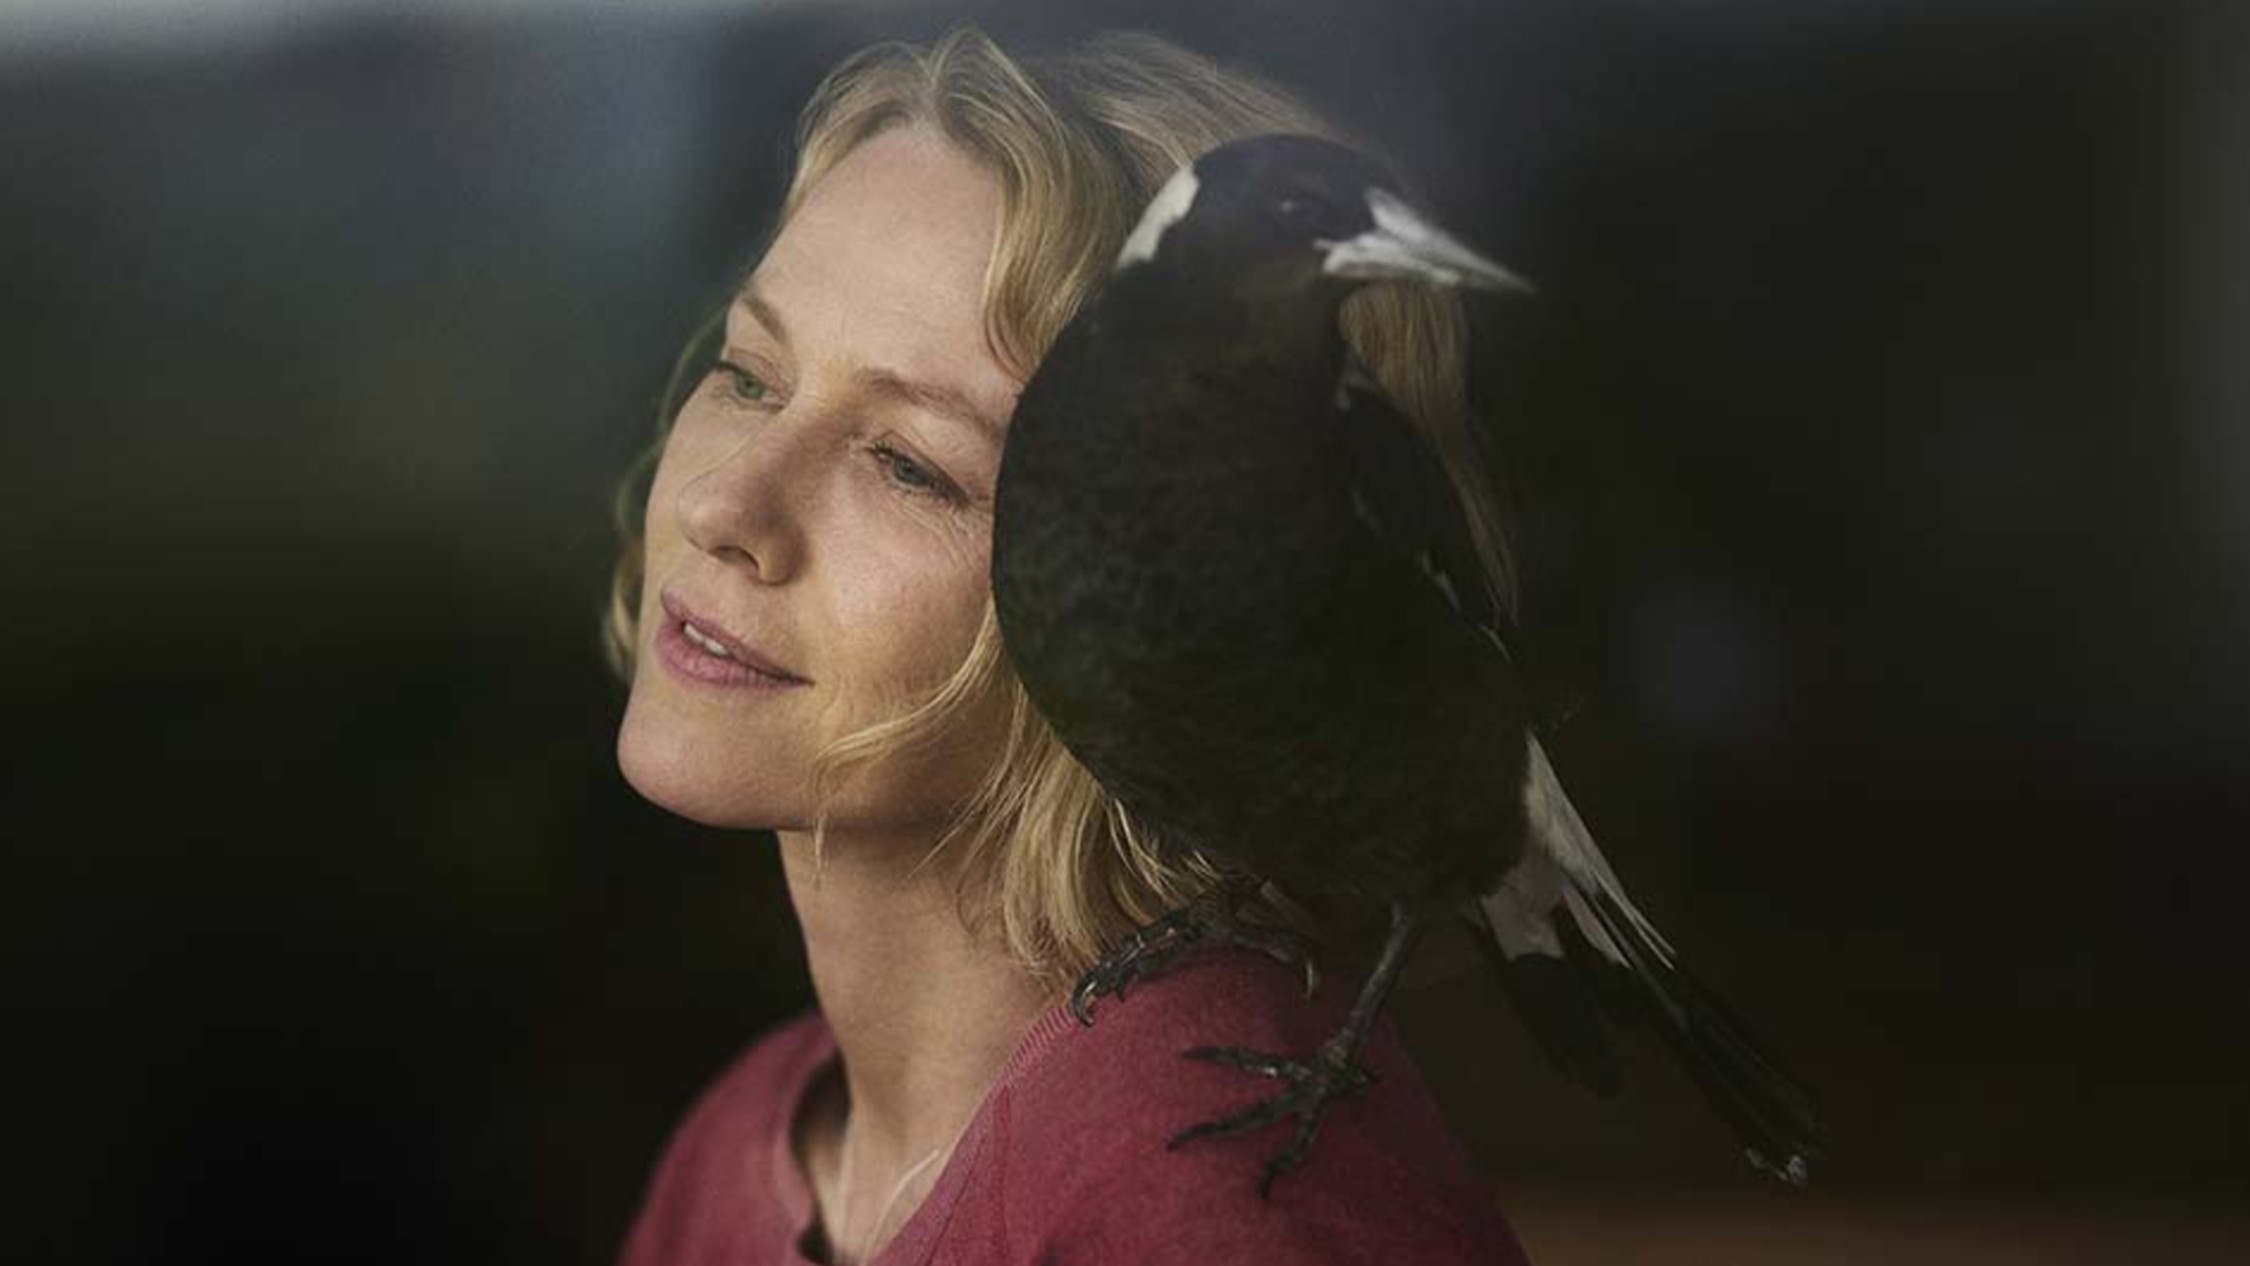 Read Time Out's review of Naomi Watts film Penguin Bloom